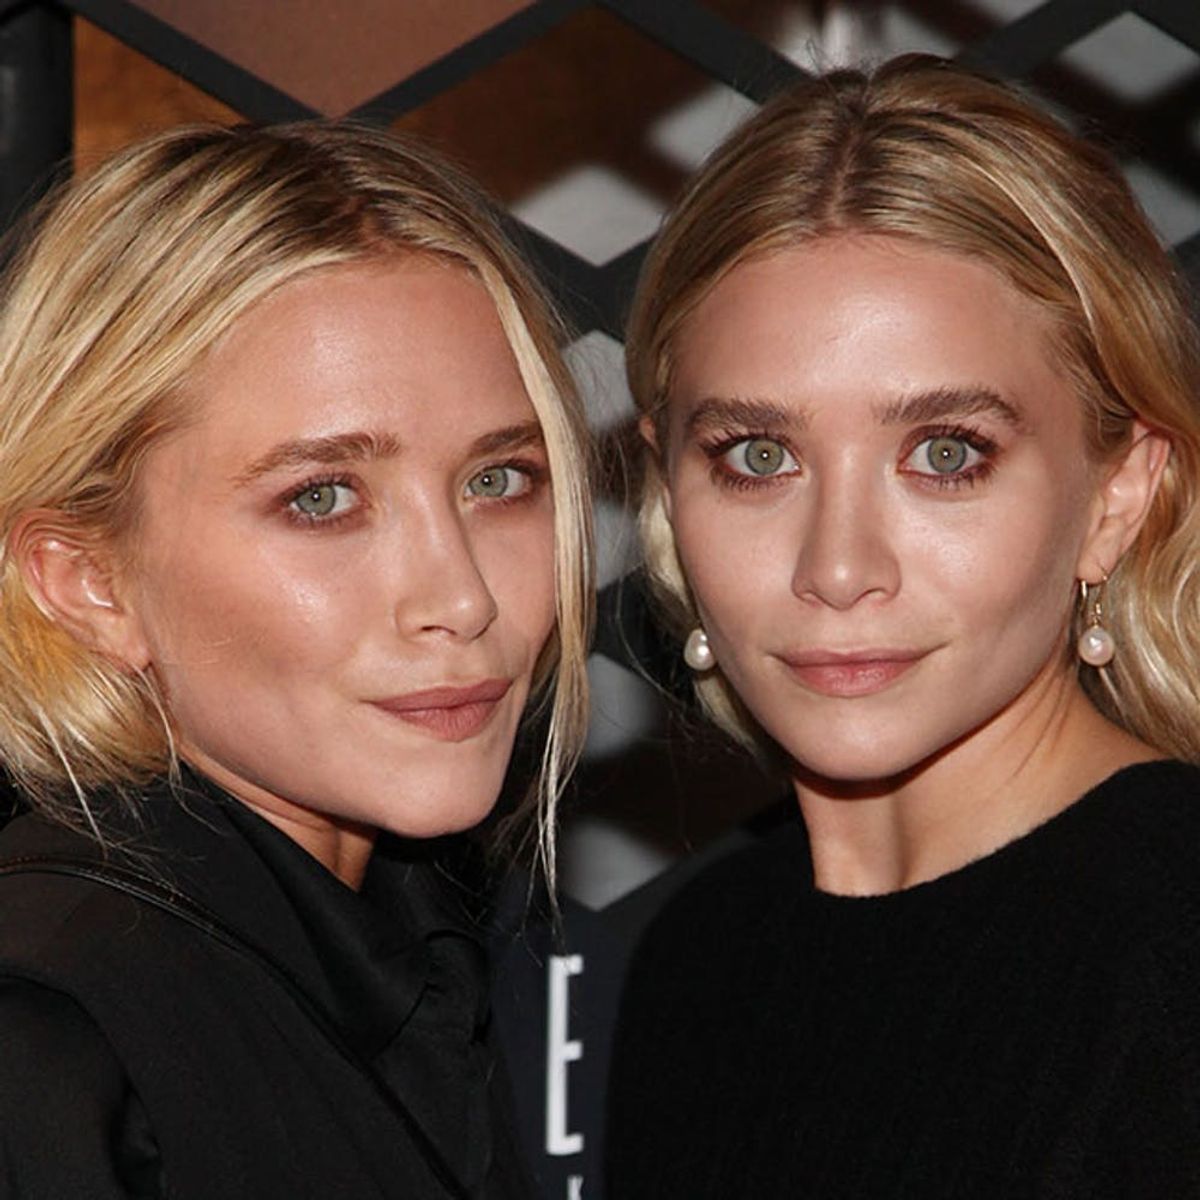 5 Makeup Hacks You Should Steal from the Olsen Twins